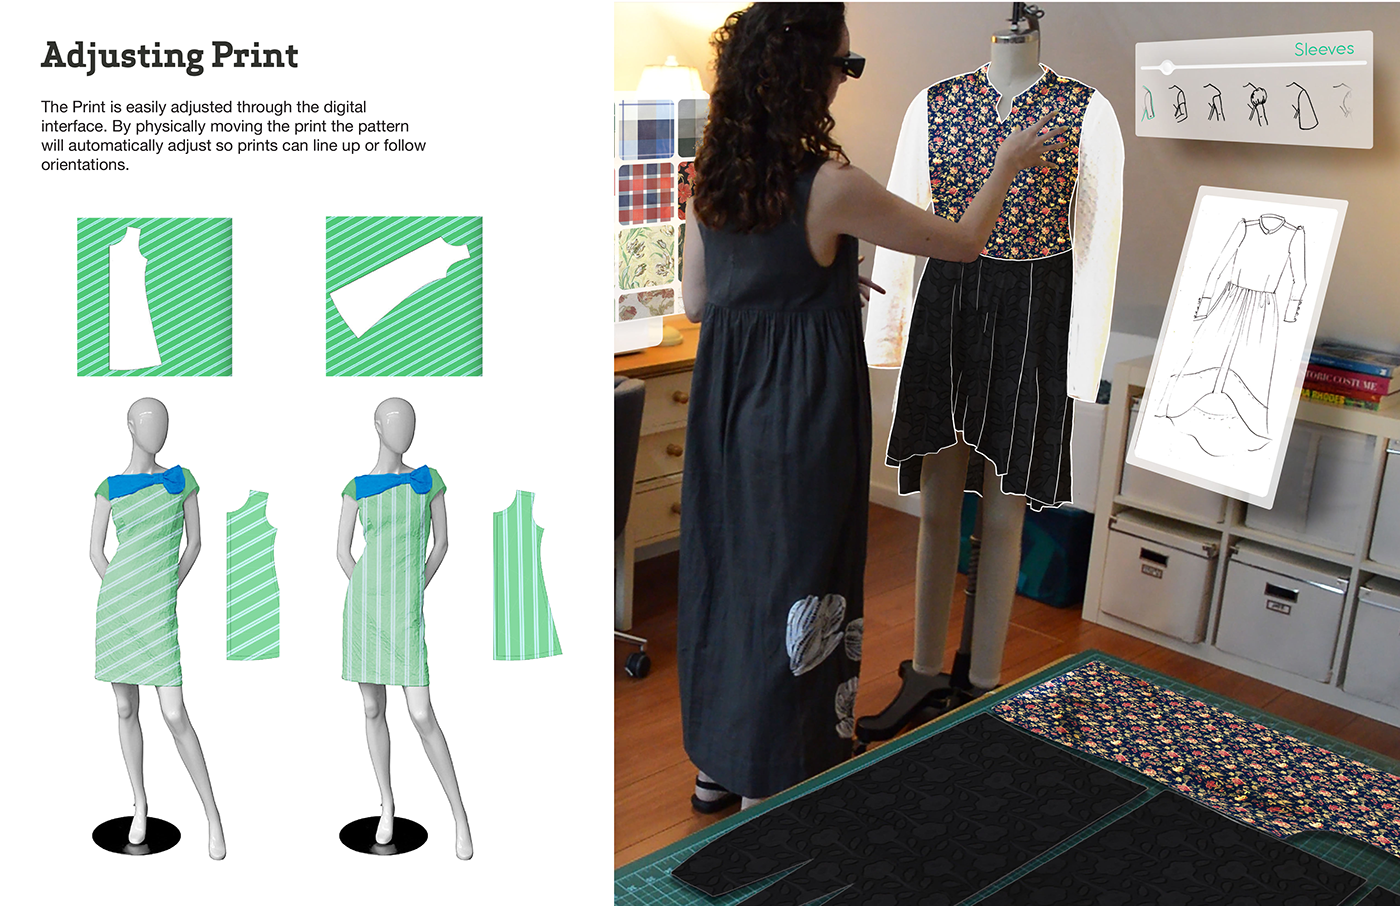 augmented reality vr AR software cloth process creative thesis senior